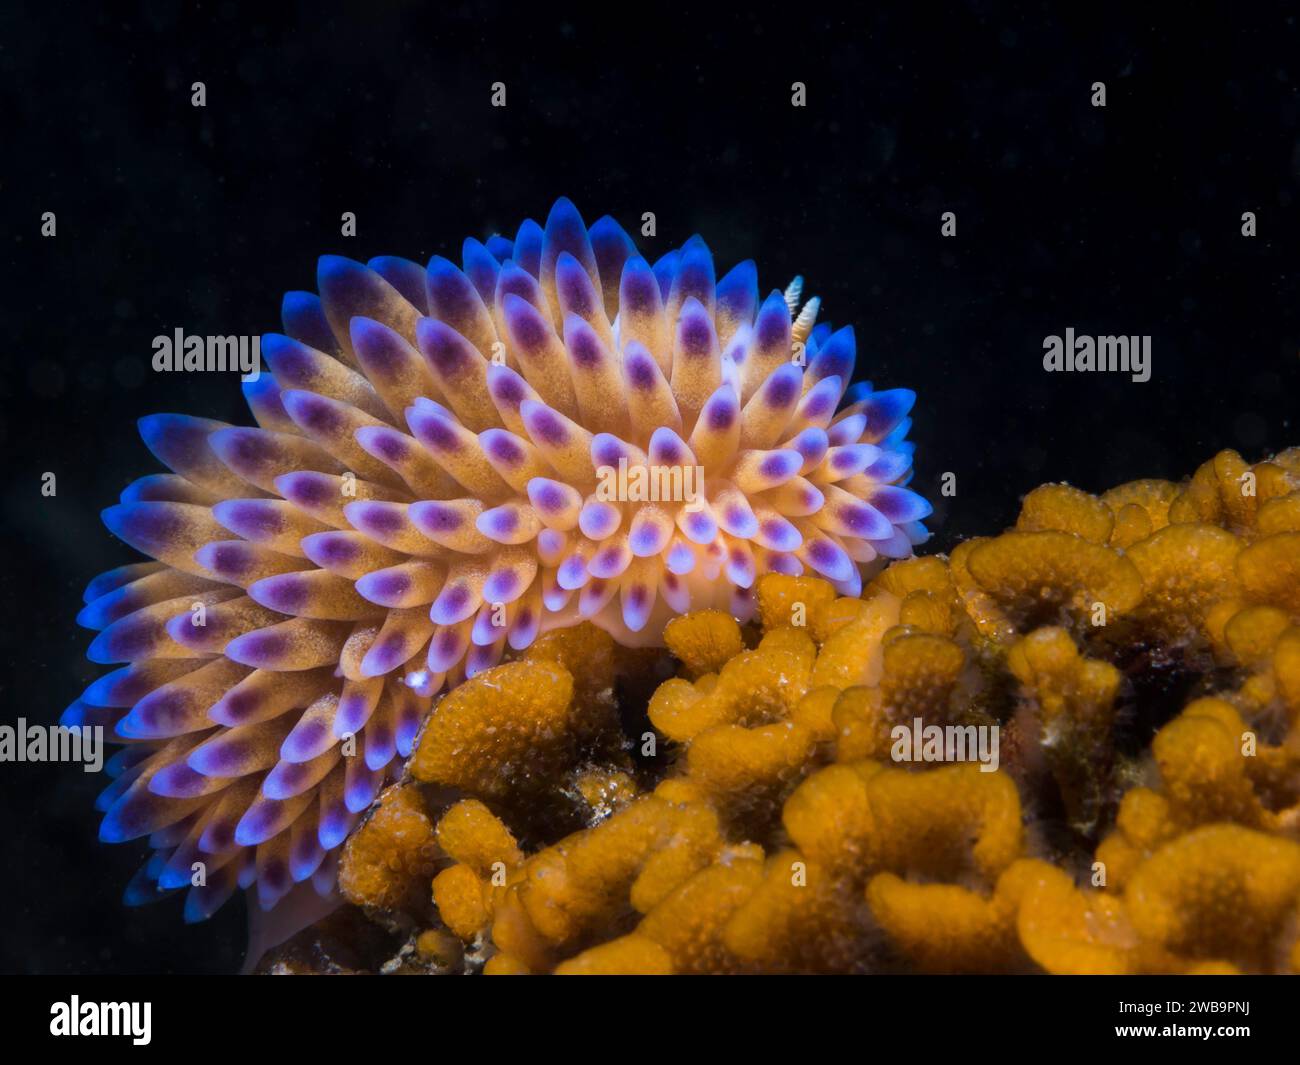 A blue Gas flame nudibranch (Bonisa nakaza) side view of the sea slug on the reef underwater Stock Photo